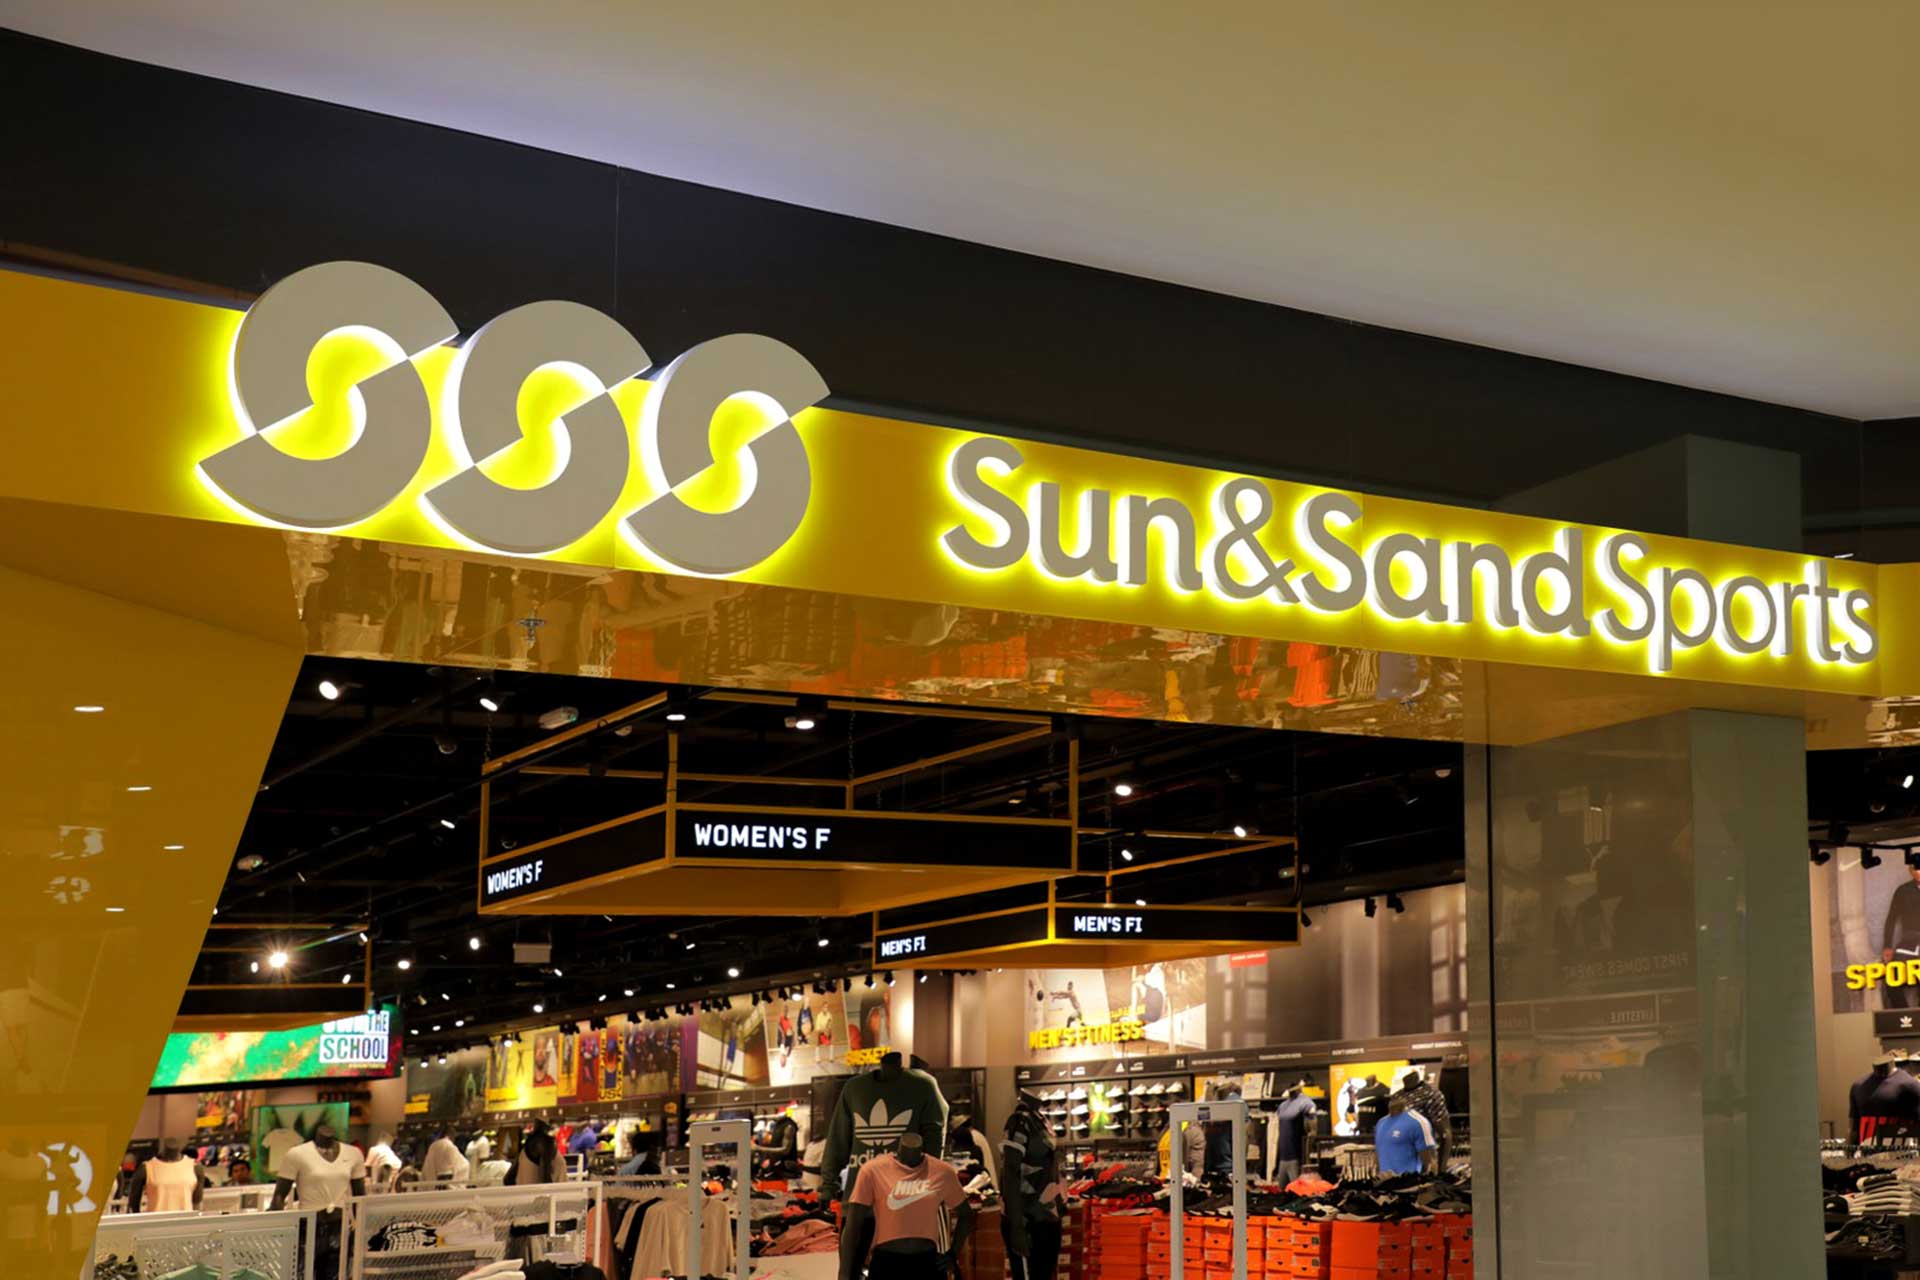 Sun & Sands Sports Store Front Signage